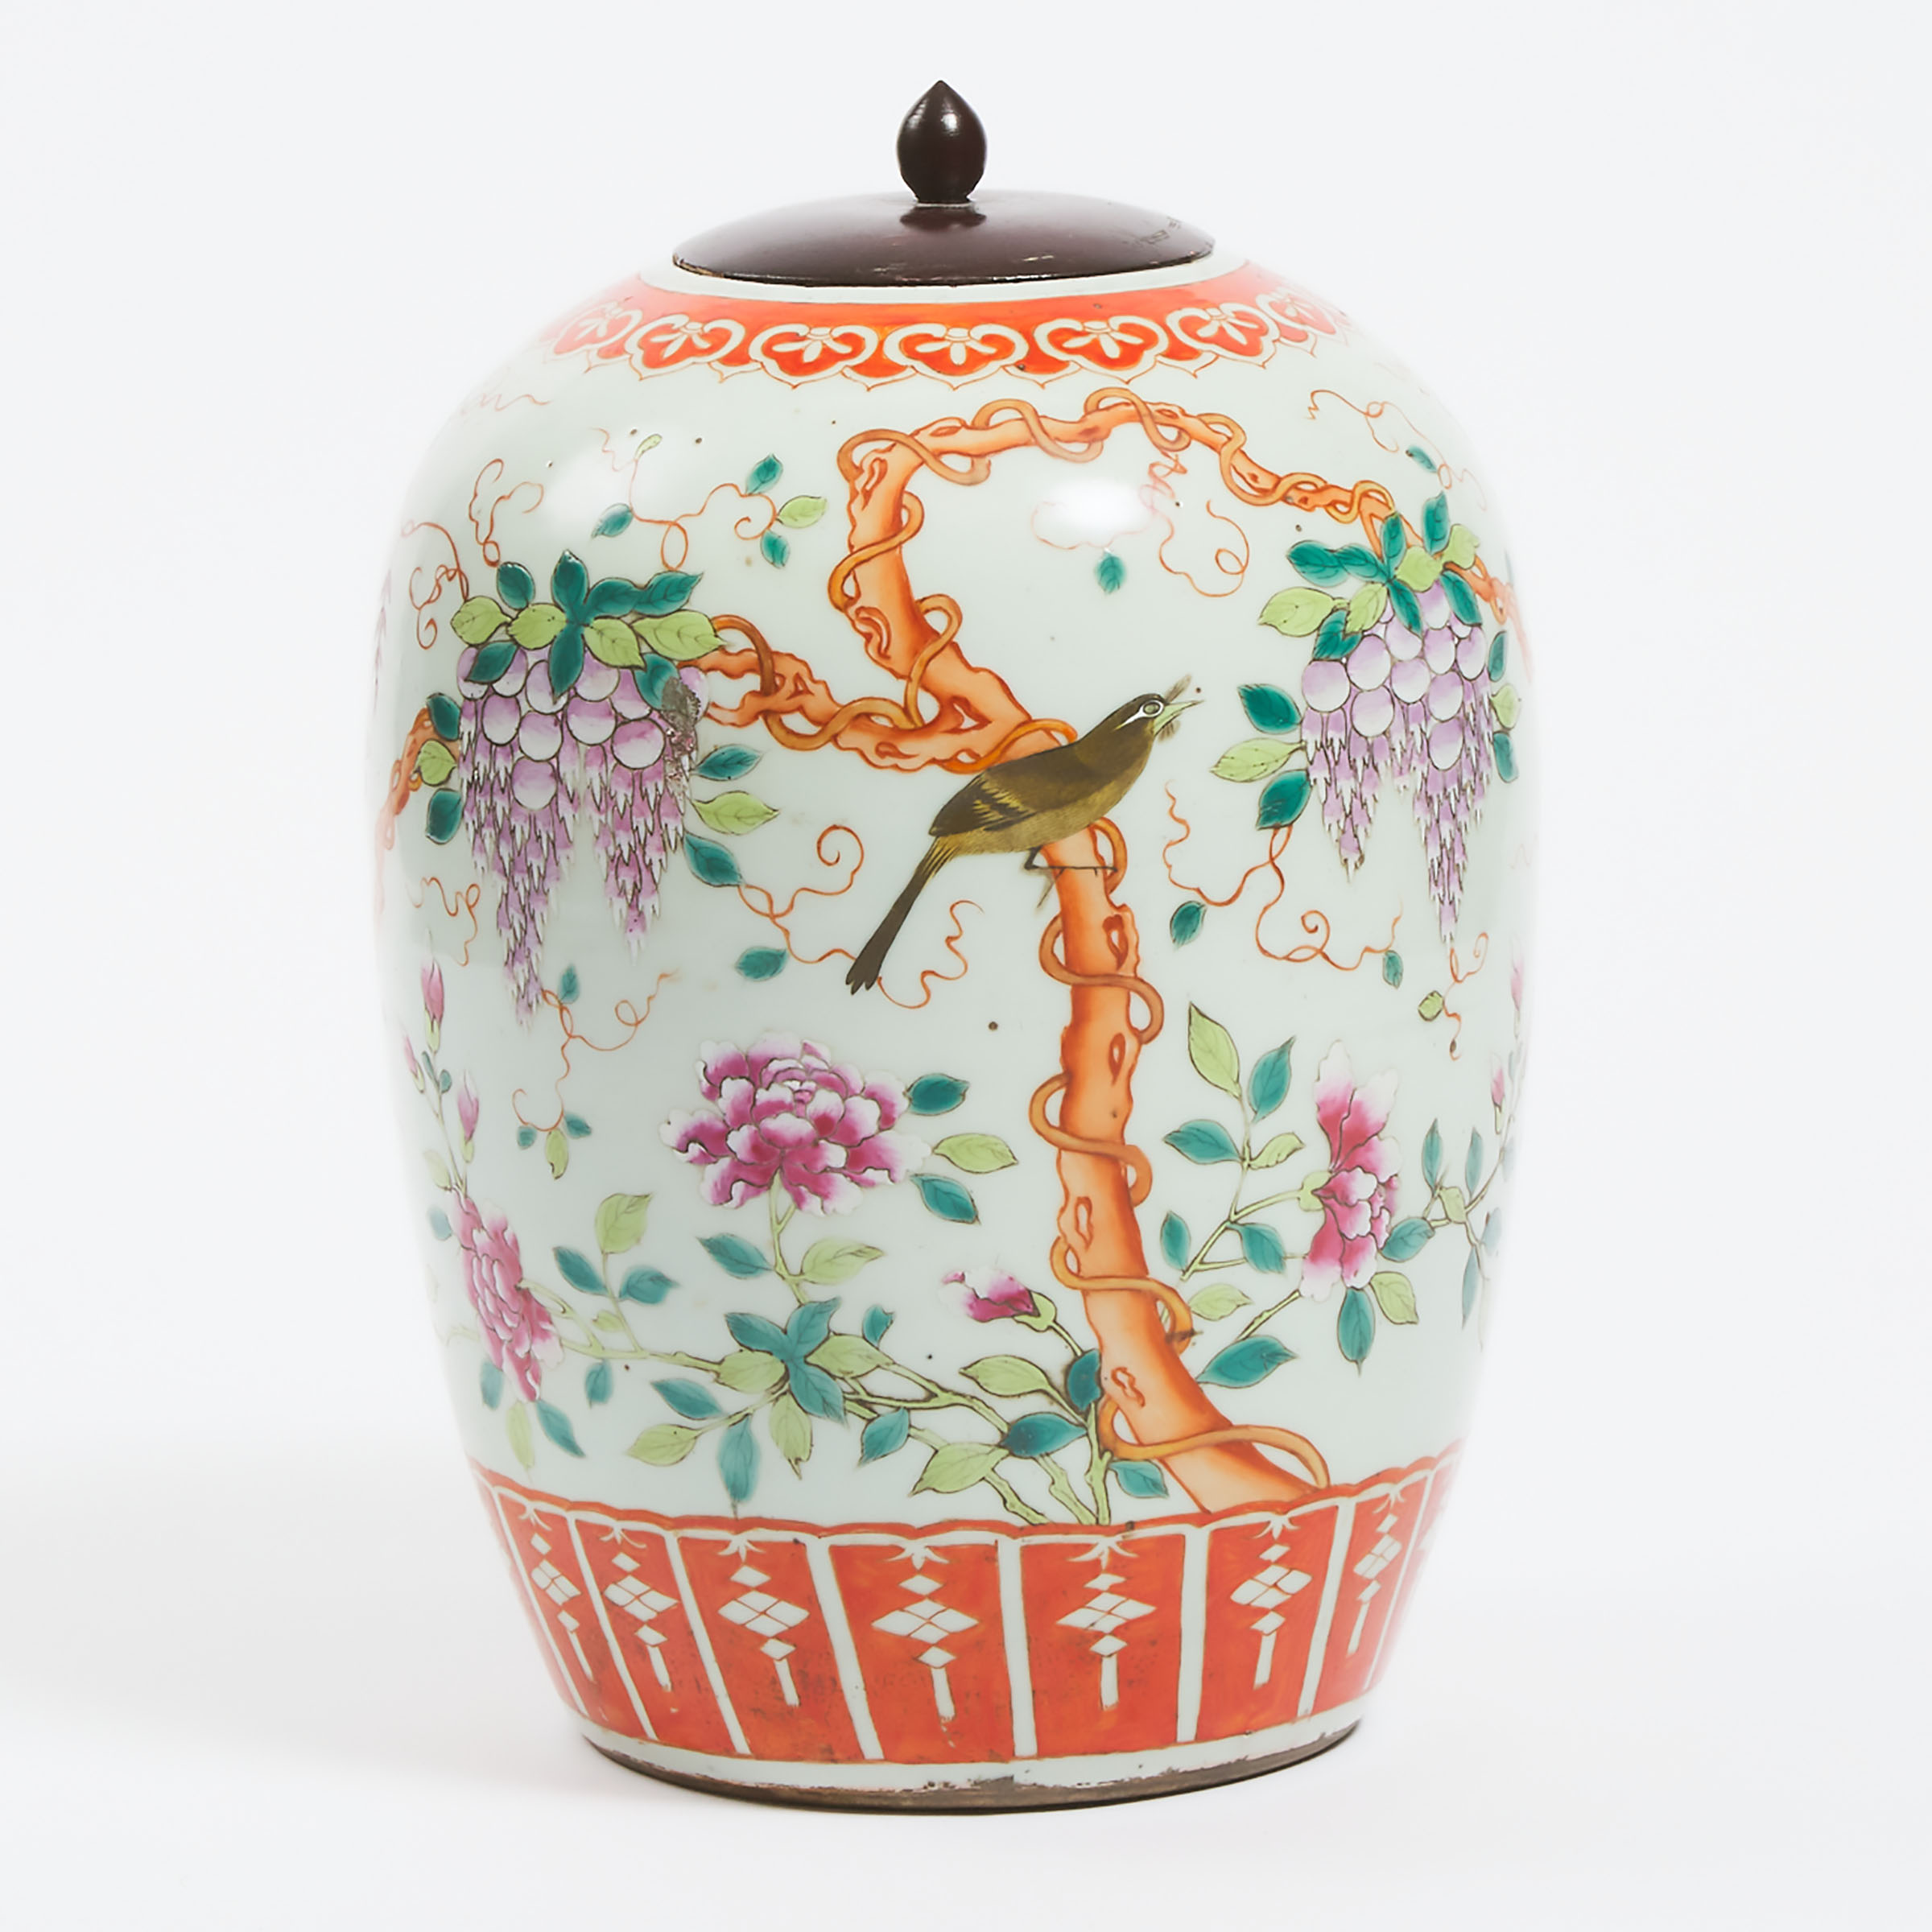 An Iron Red and Enamel Decorated 'Birds and Grapes' Lidded Jar, Republican Period